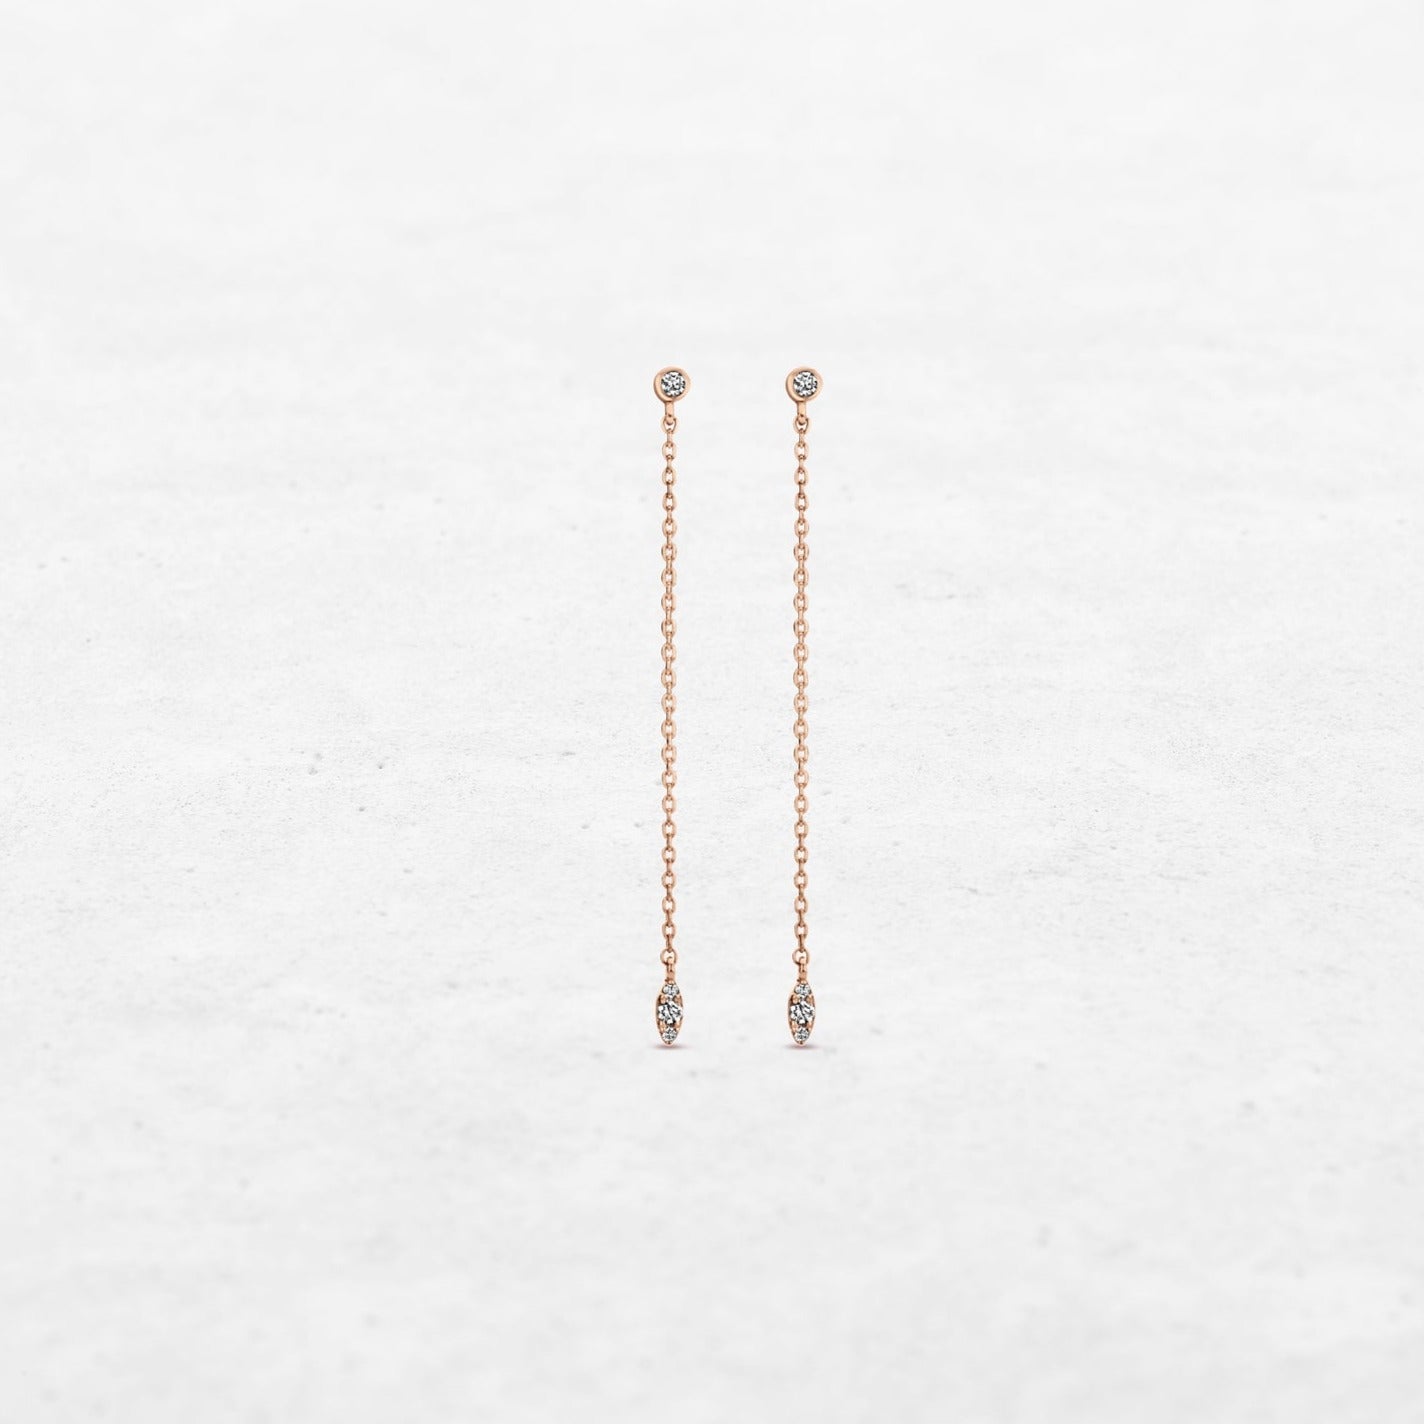 Single diamond leaf earrings hanging on chain in rose gold made by O! Jewelry